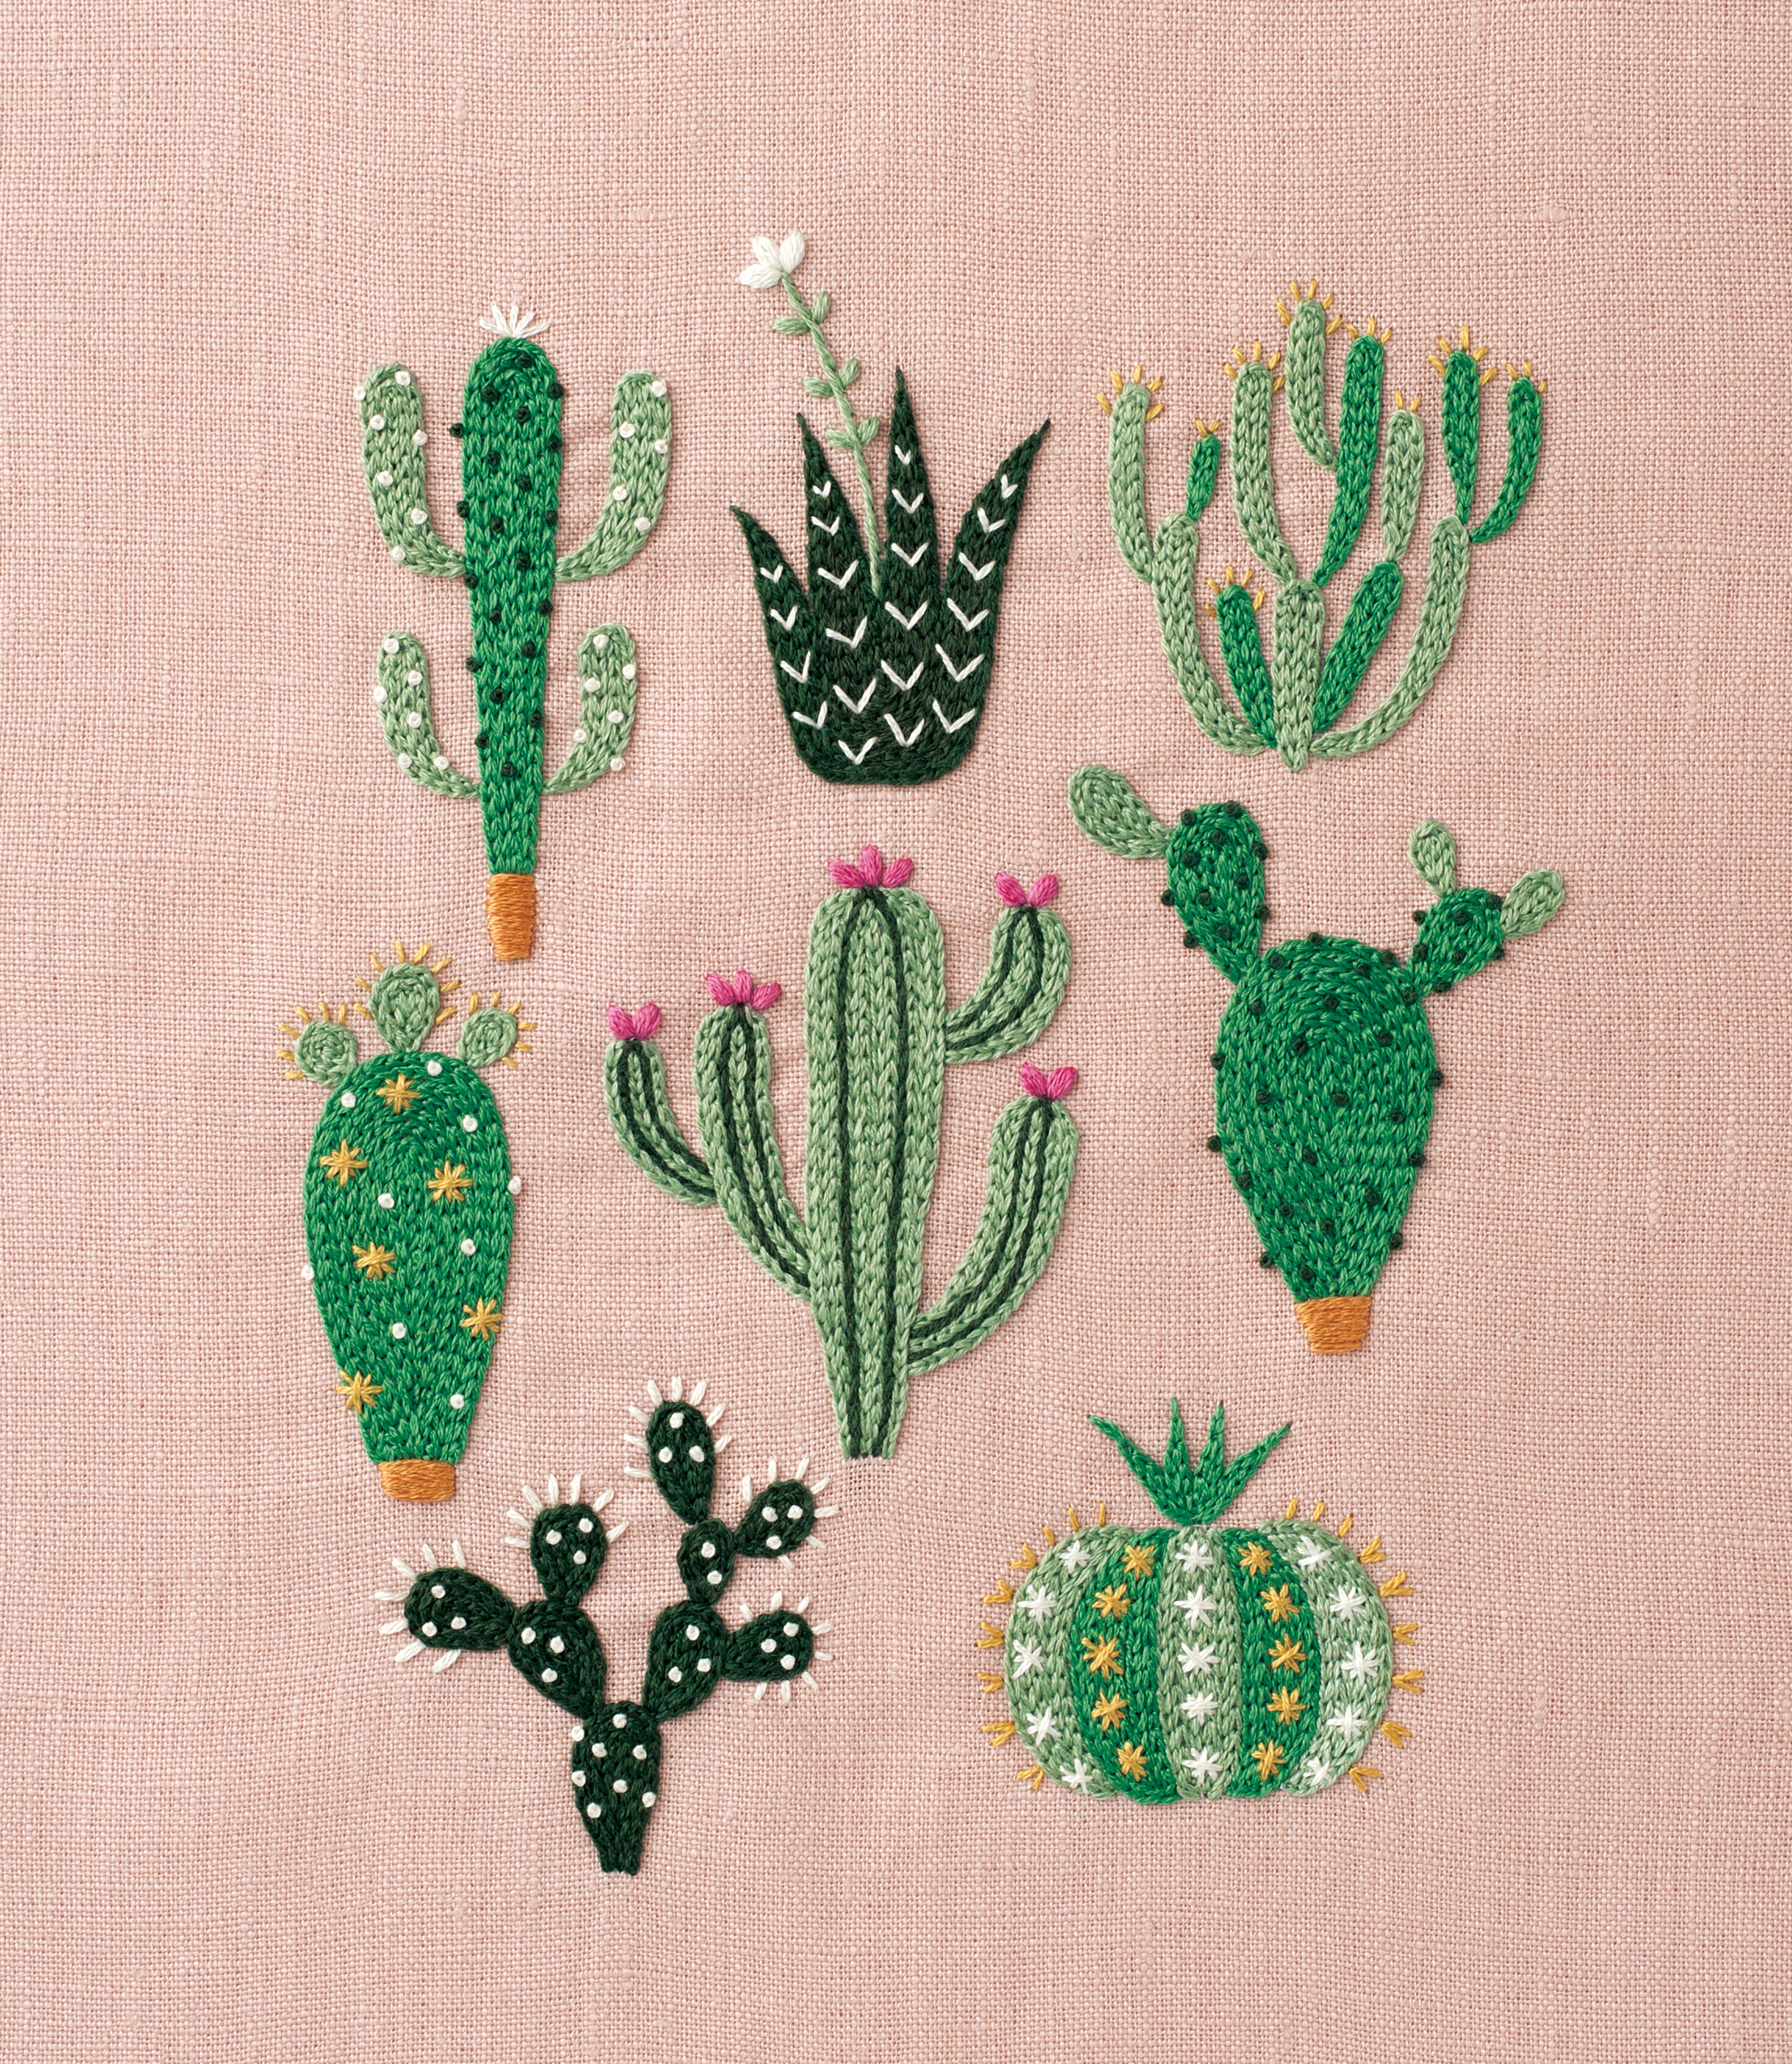 Diy Embroidery Patterns Diy Floral Cactus Embroidery Projects From A Year Of Embroidery